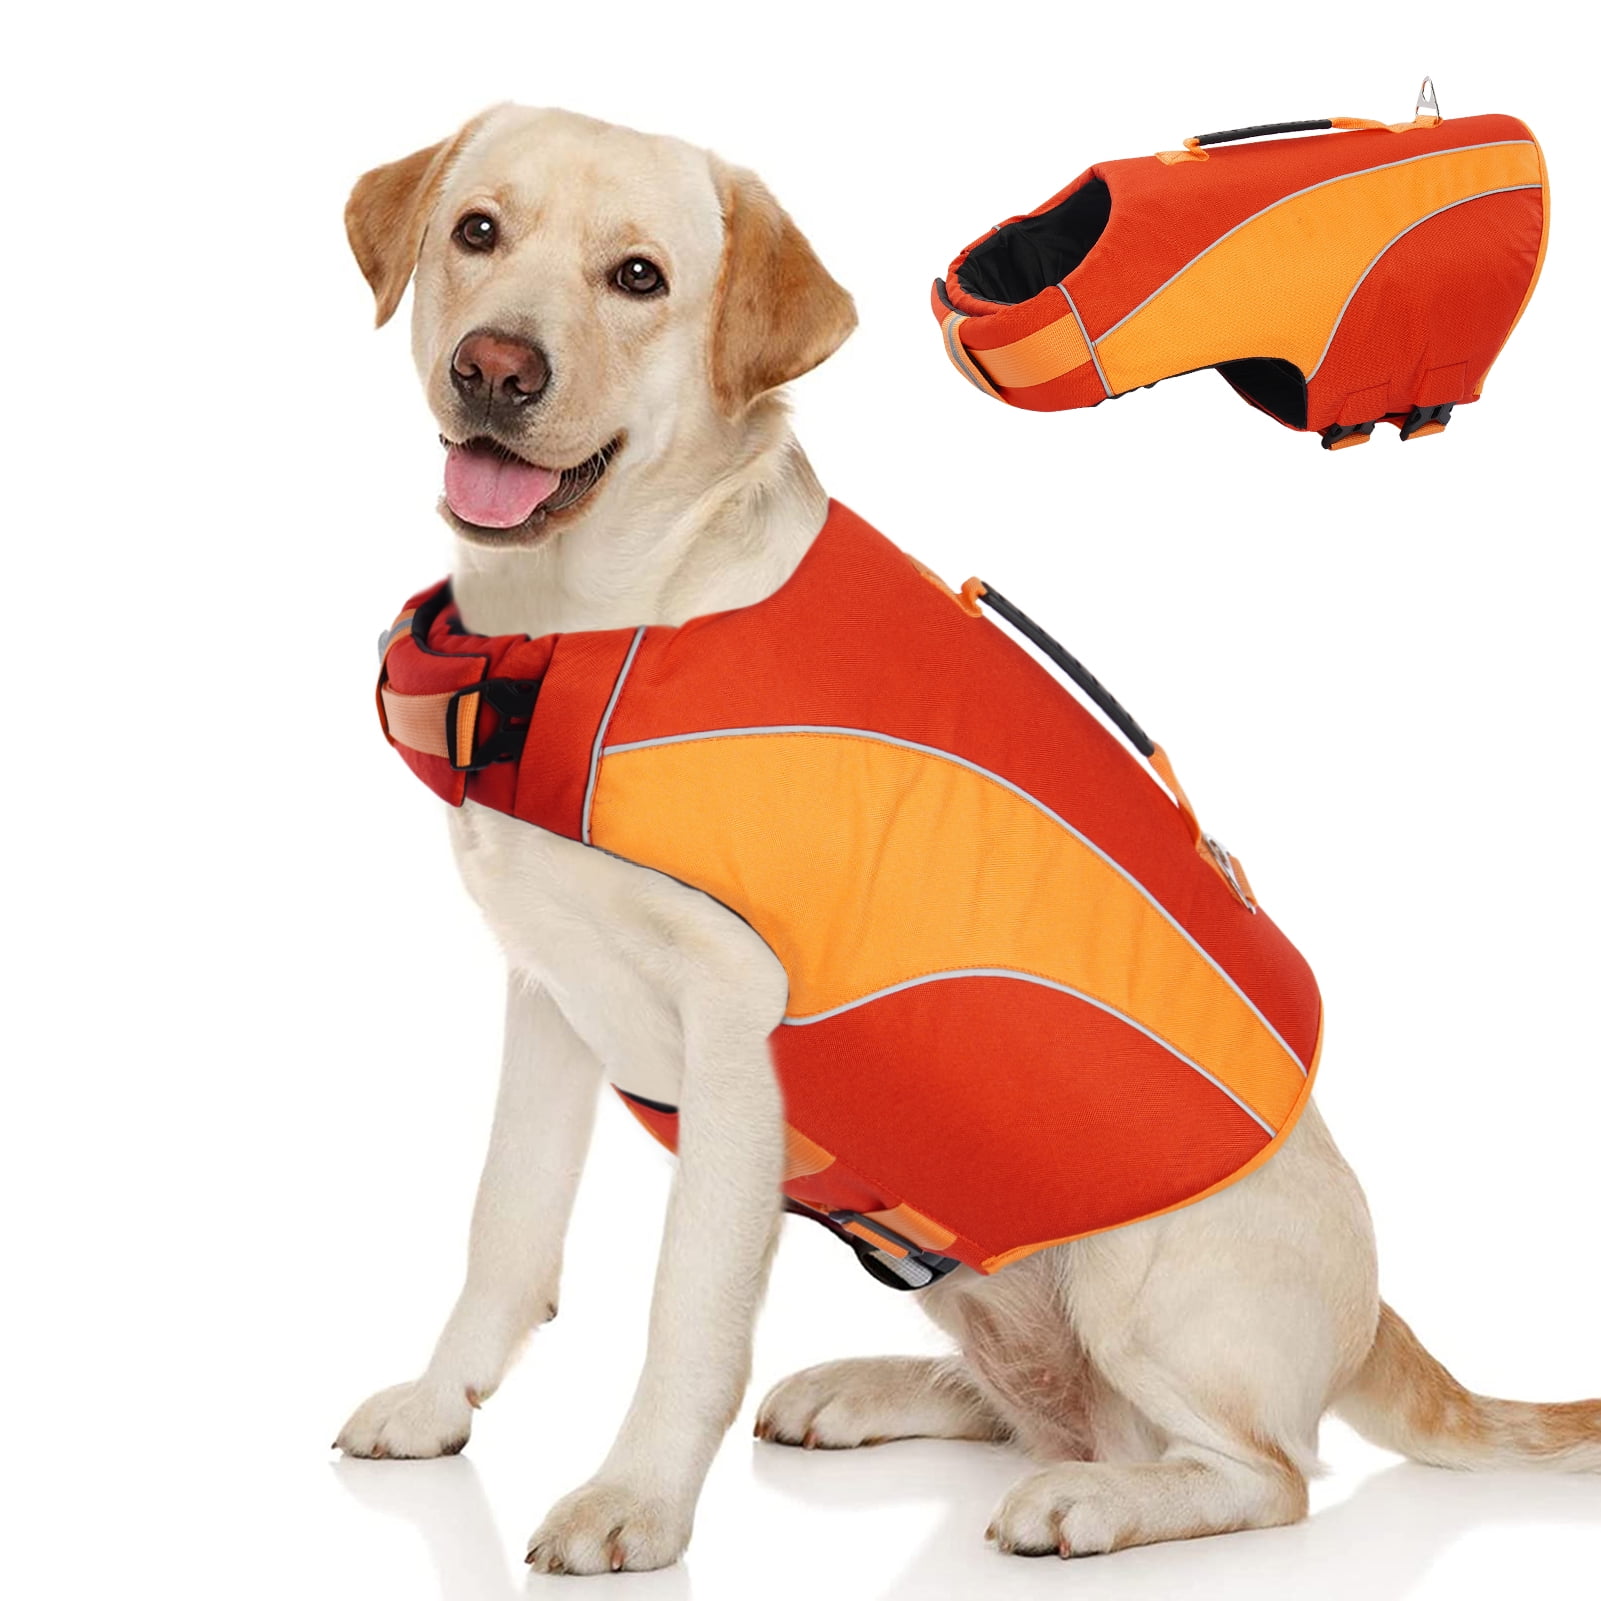 Queenmore Dog Life Jacket Ripstop Dog Safety Vest Adjustable Preserver with High Buoyancy and Durable Rescue Handle for Small,Medium,Large Dogs 